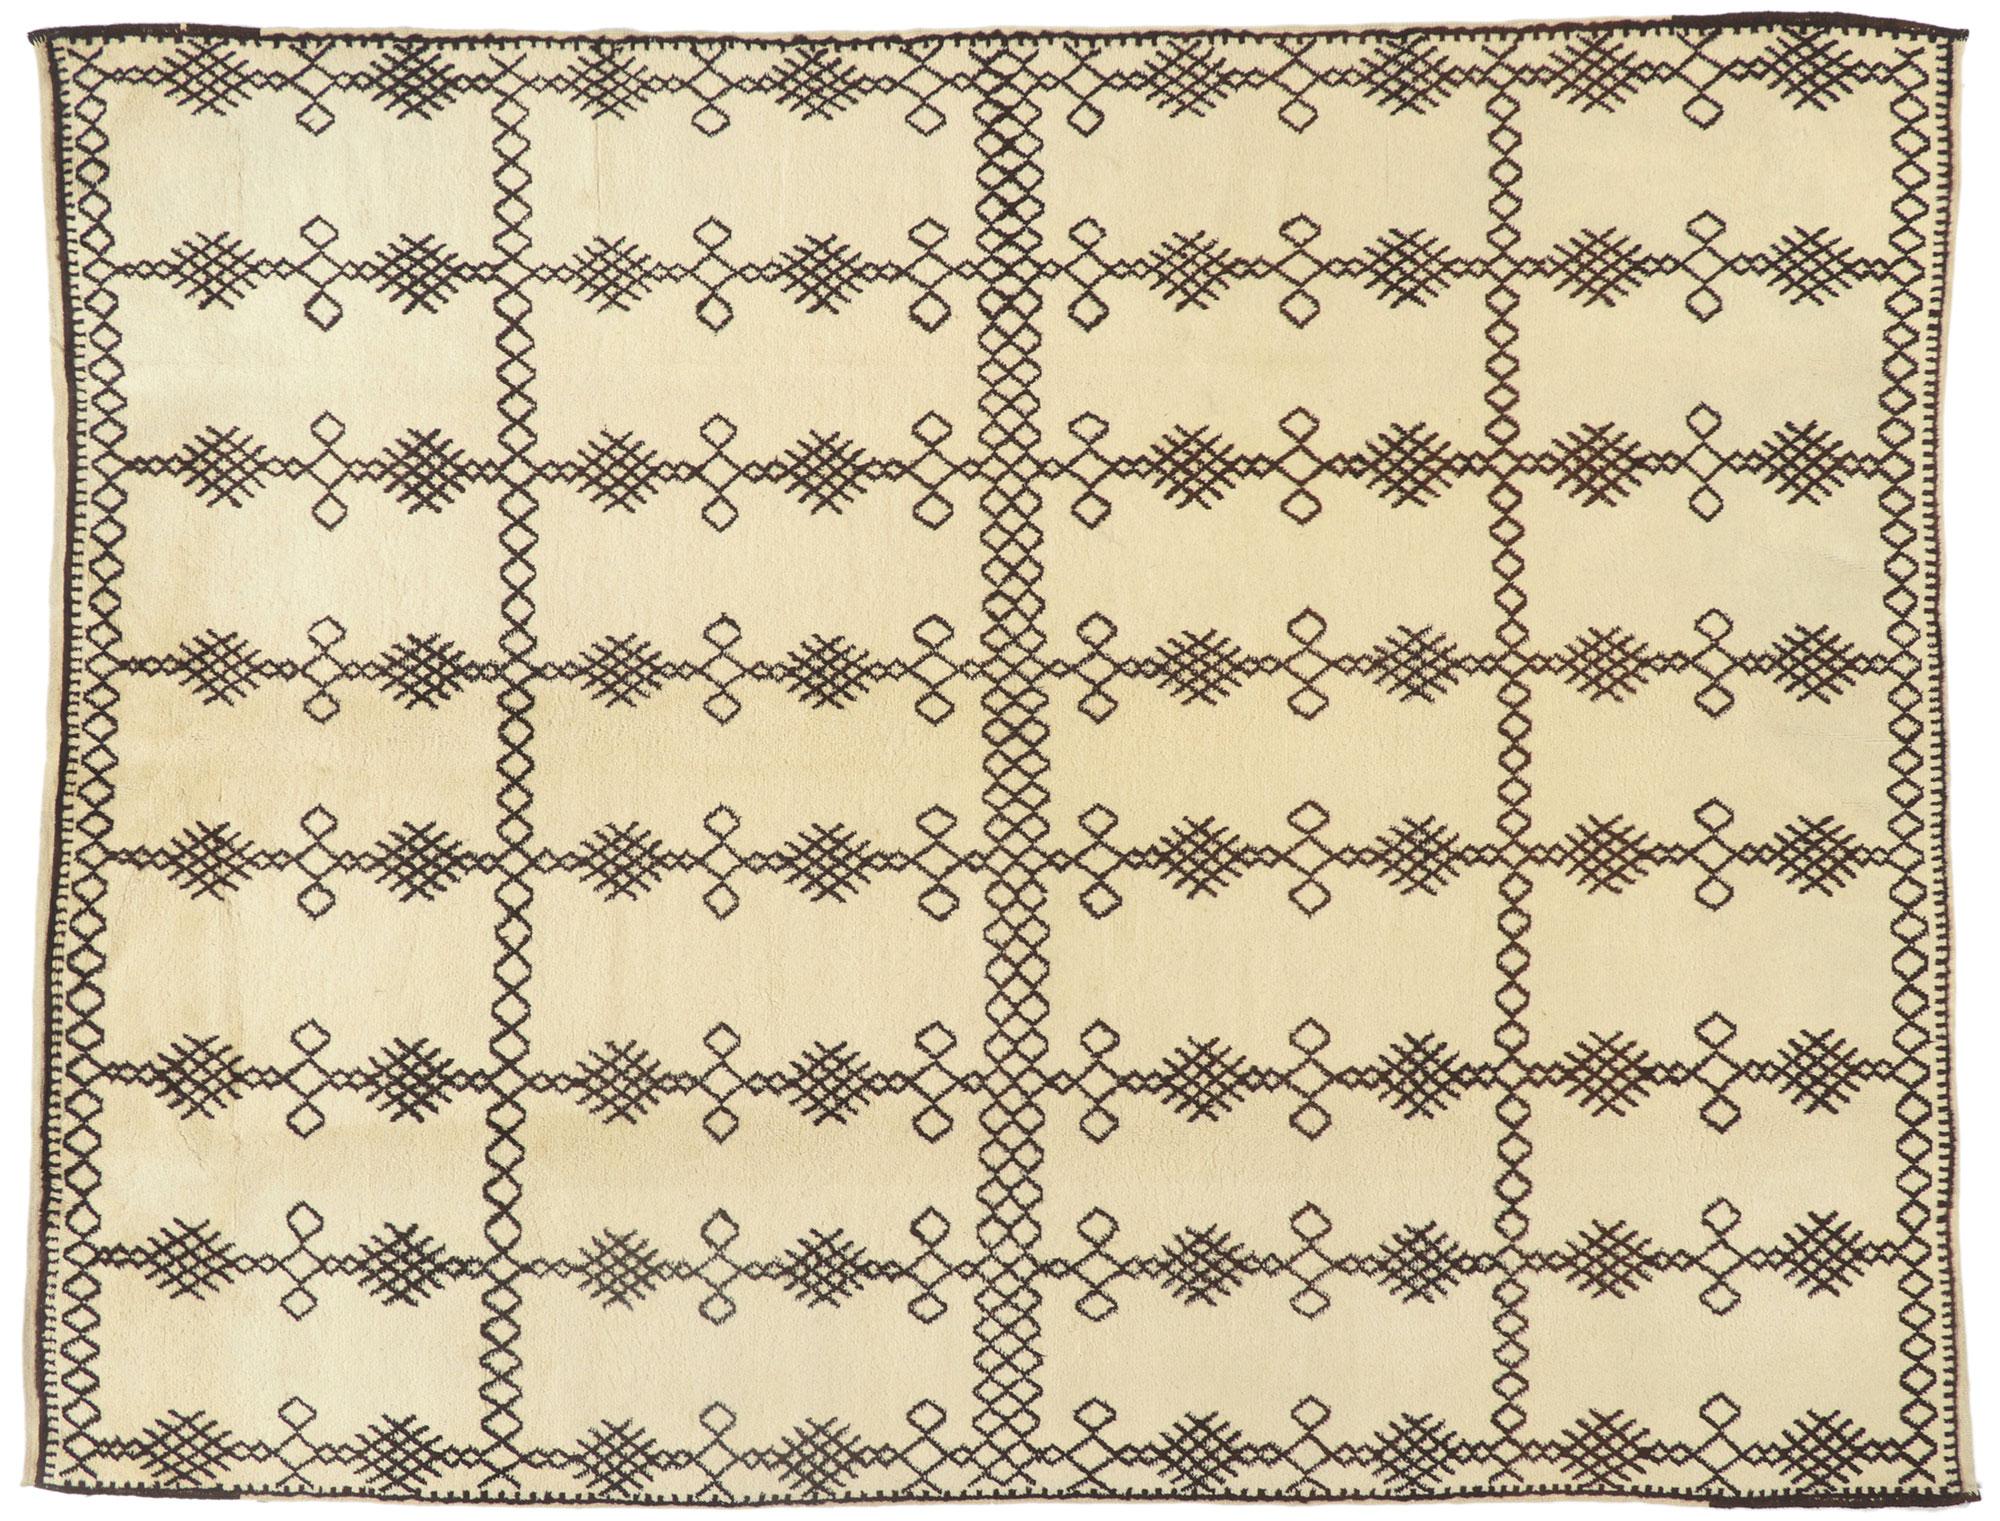 74168 Vintage Berber Moroccan Rug, 08'04 X 10'07. 
Emanating nomadic charm with incredible detail and texture, this hand knotted wool vintage Moroccan rug is a captivating vision of woven beauty. The allover pattern and neutral colorway woven into